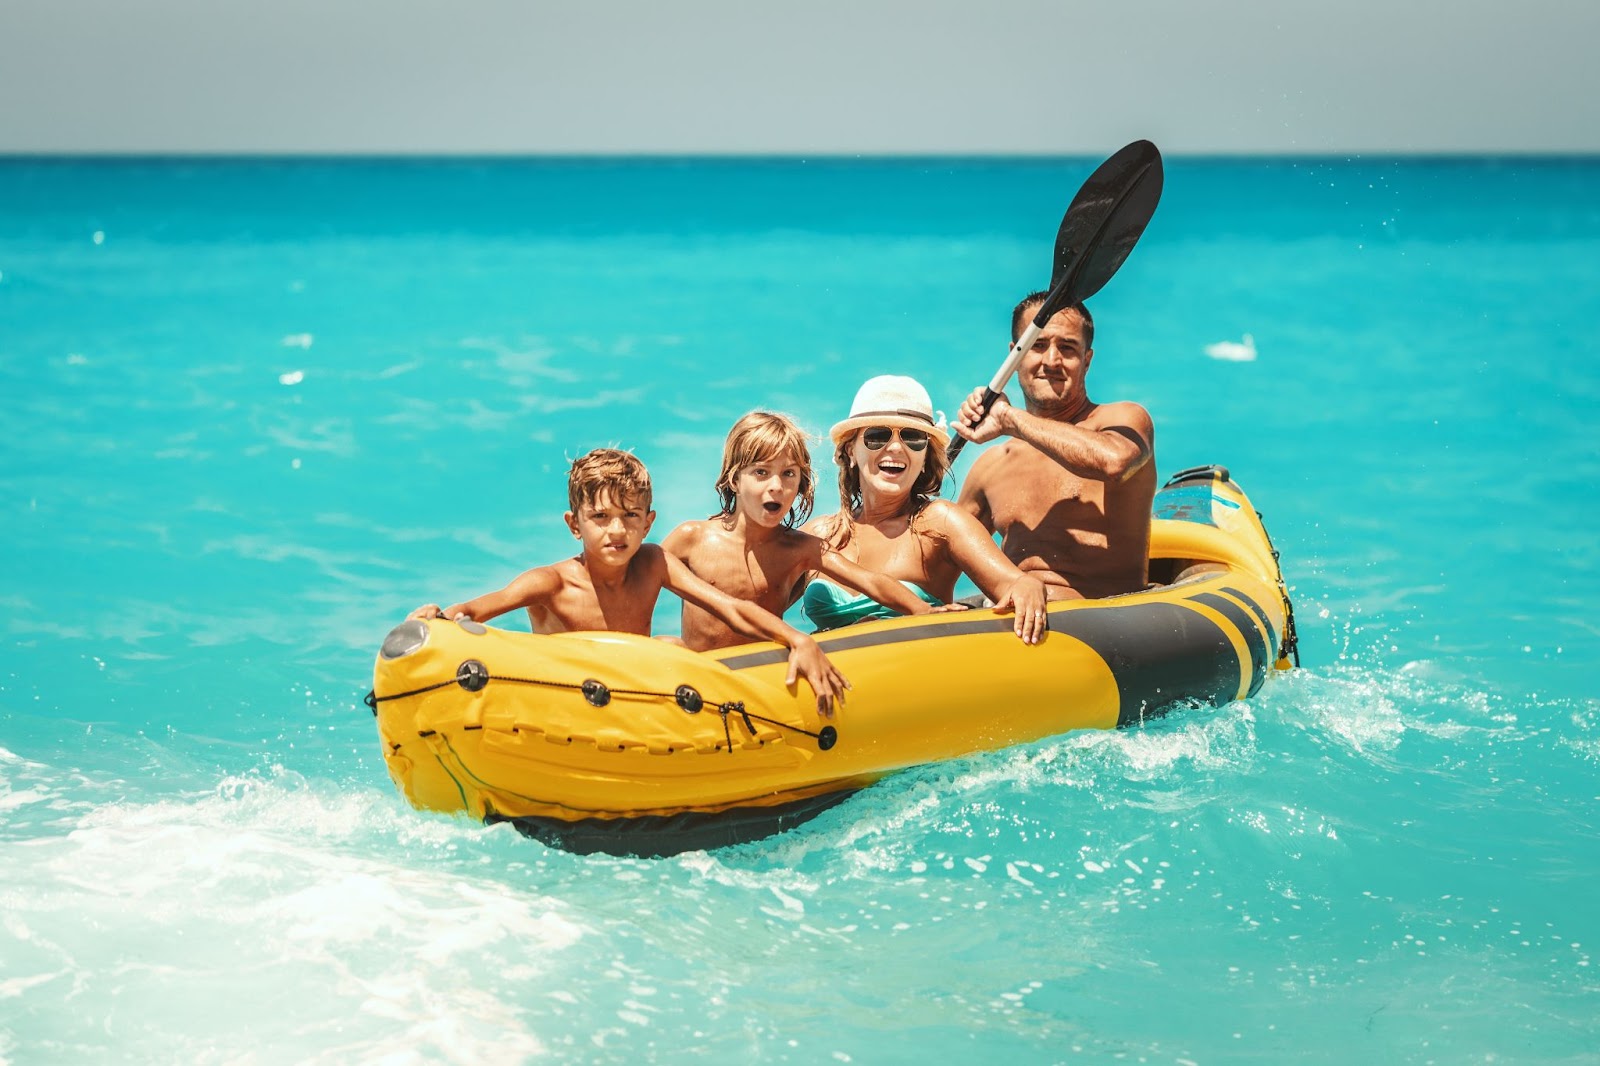 A happy family is enjoying a ride in a rubber kayak, and waves are splashing them in tropical ocean water during summer vacation.
